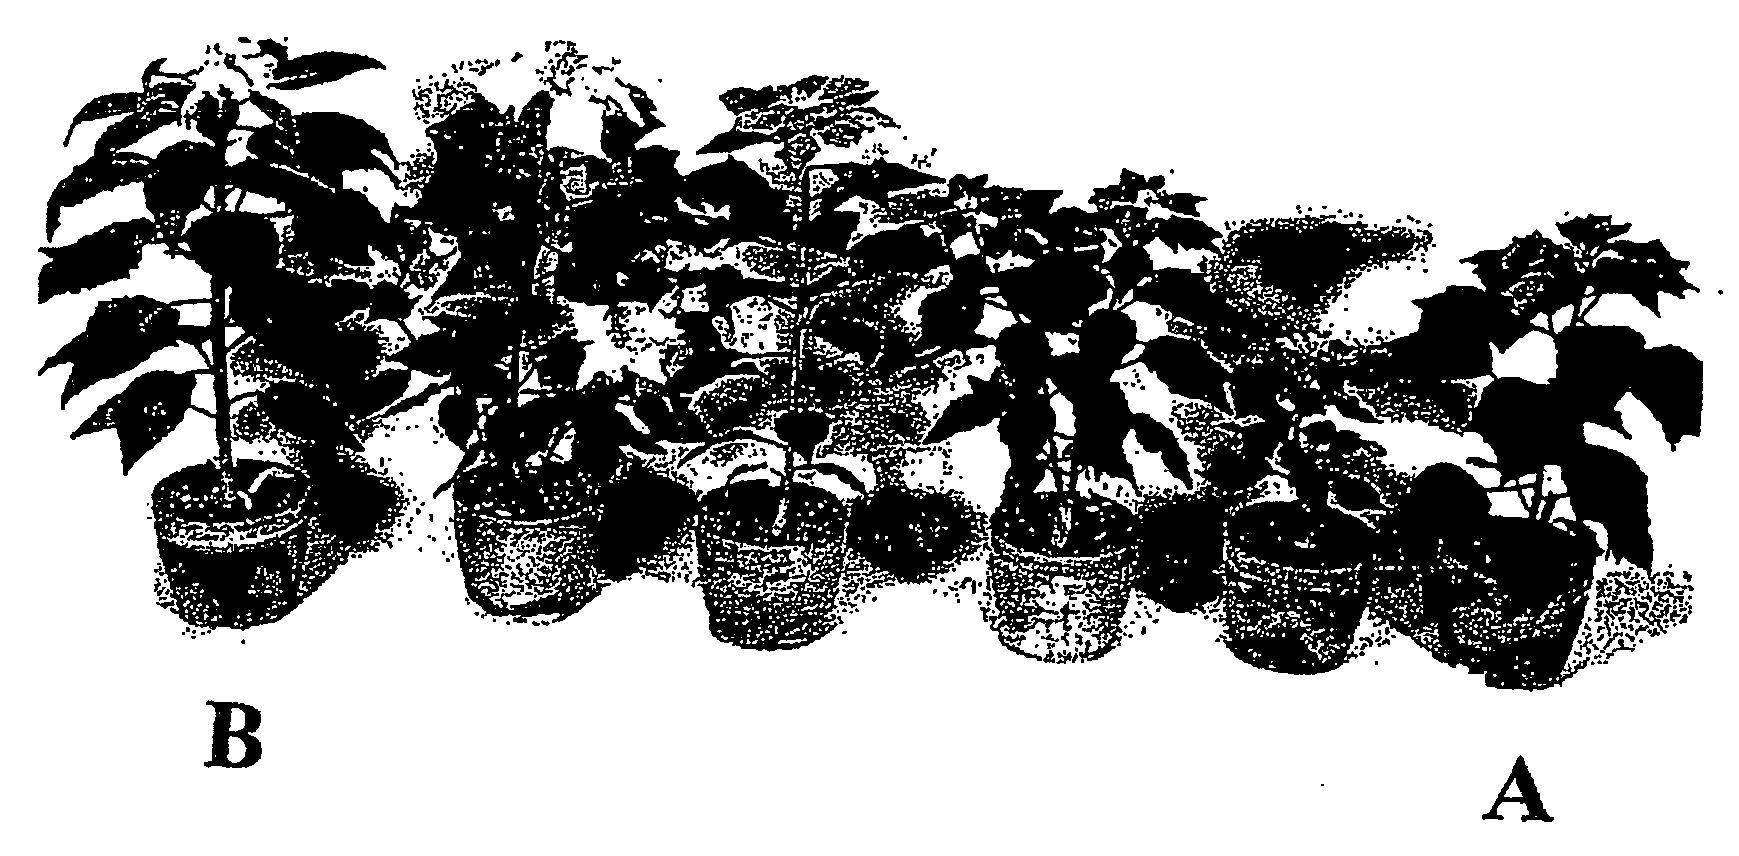 Method of producing euphorbia interspecific hybrid plants by cutting and then culturing the hybrid embryos